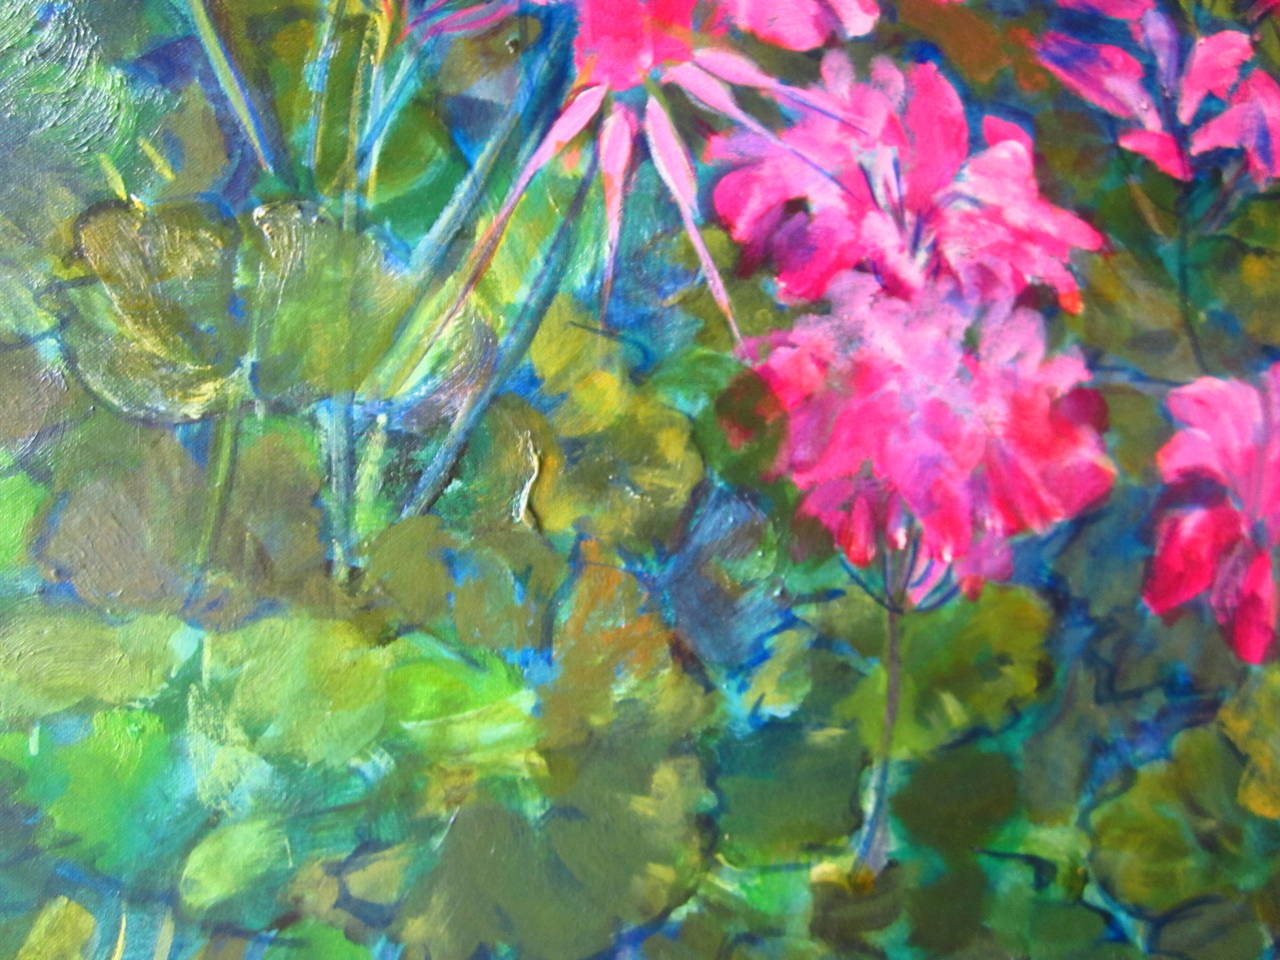 Geraniums - Pink Figurative Painting by Evelyne Ballestra